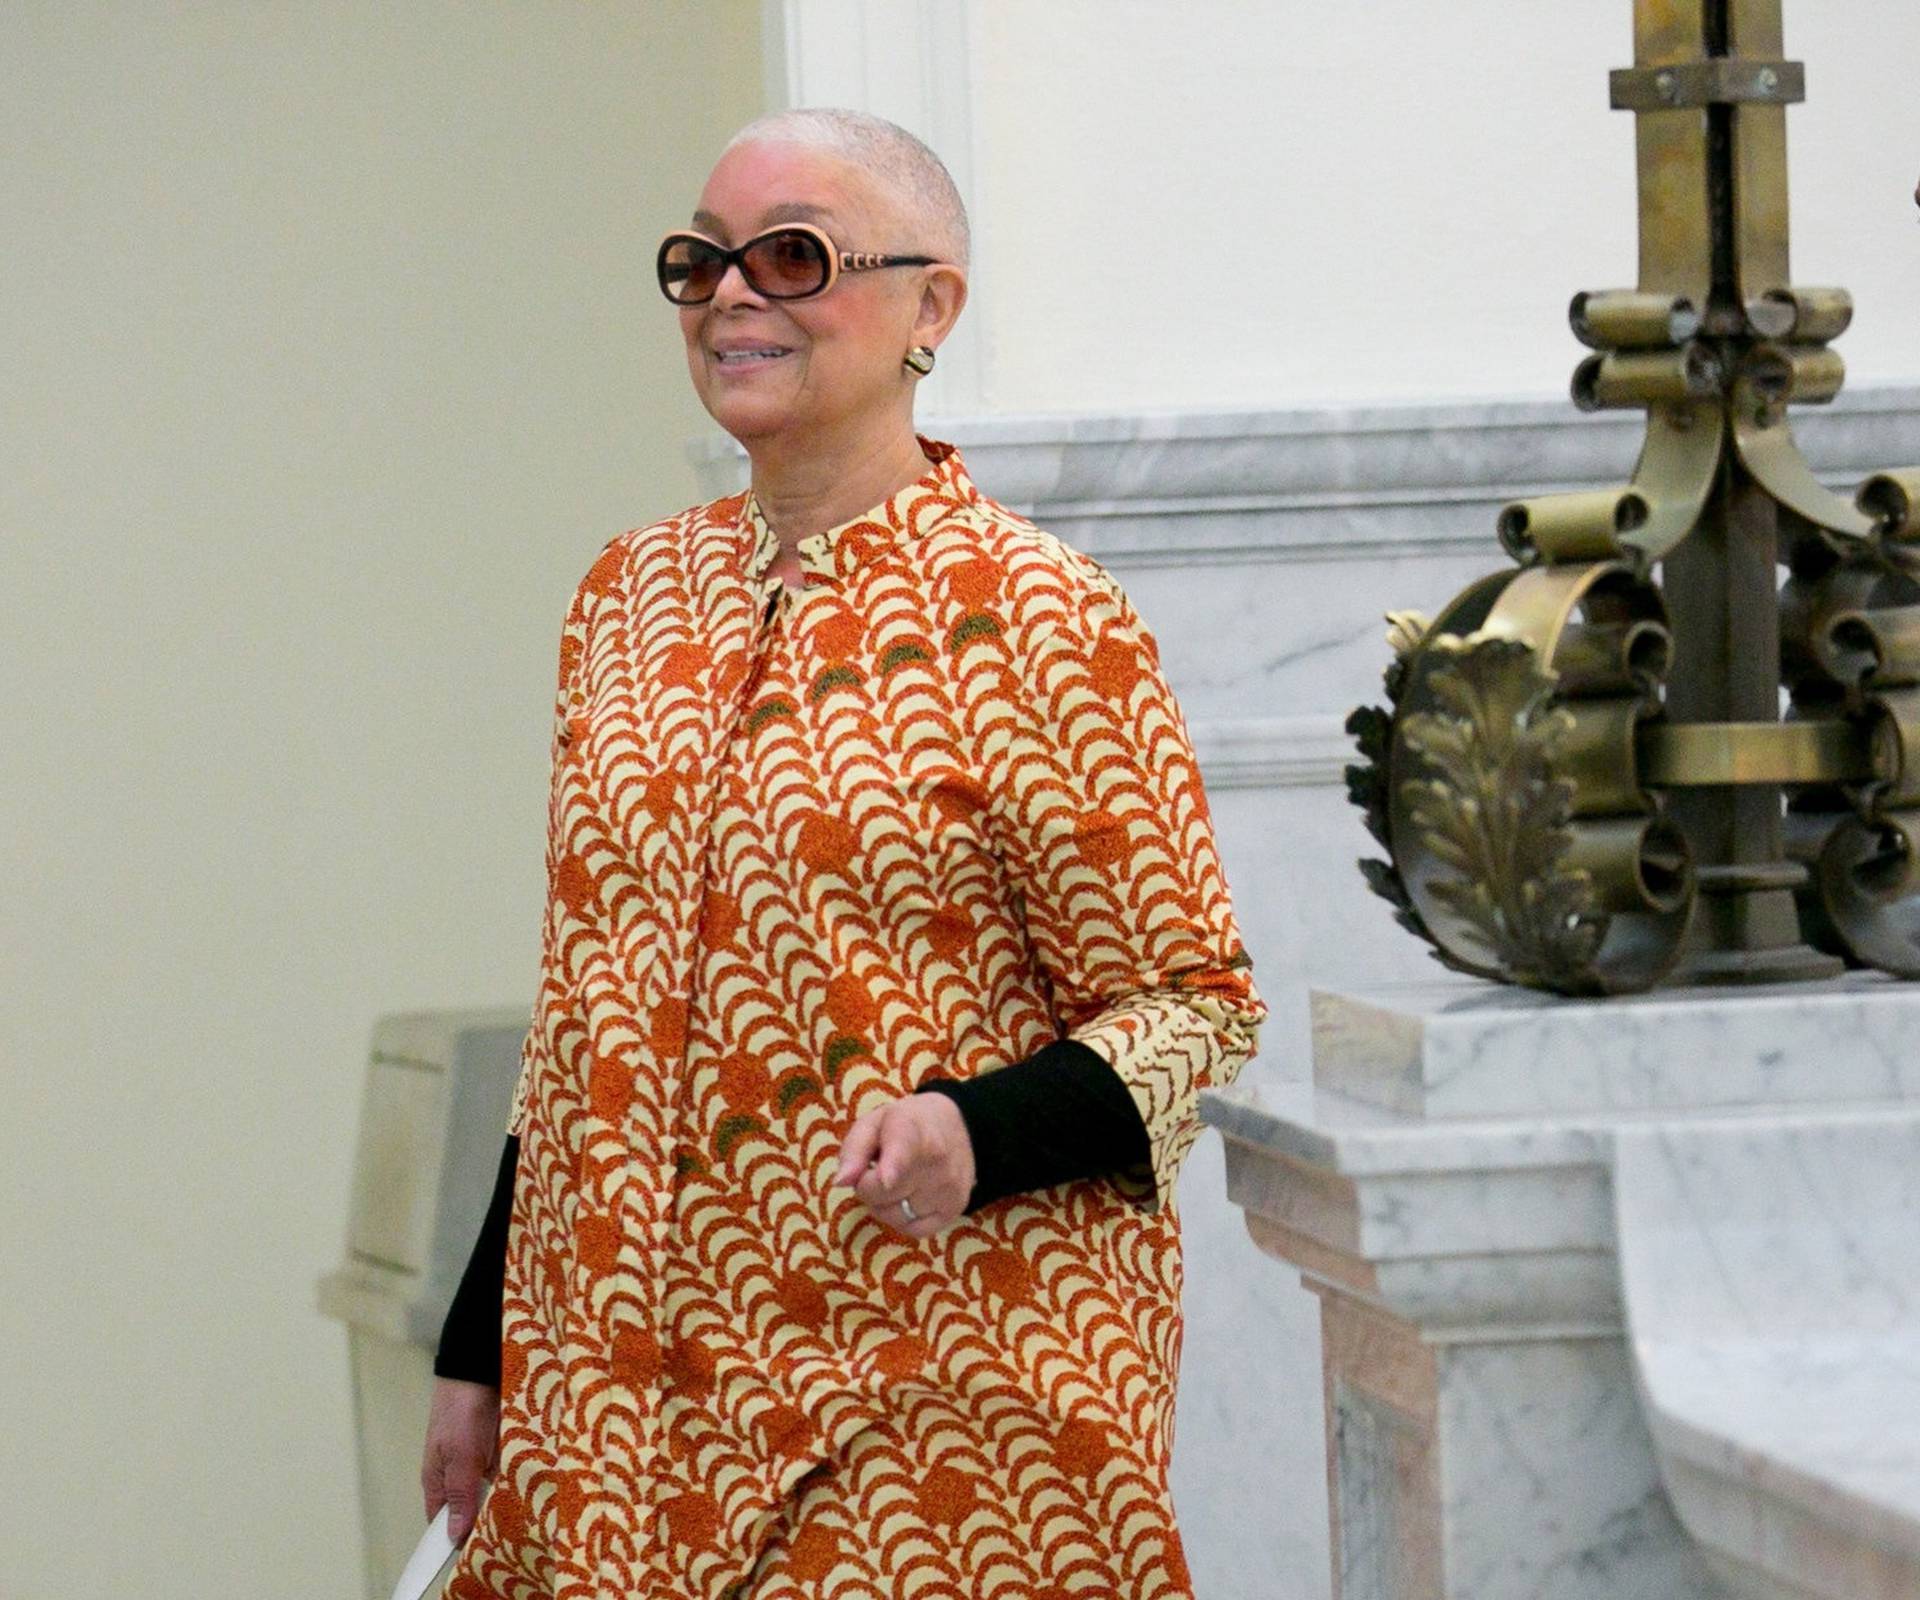 Camille Cosby arrives at the Montgomery County Courthouse in Norristown